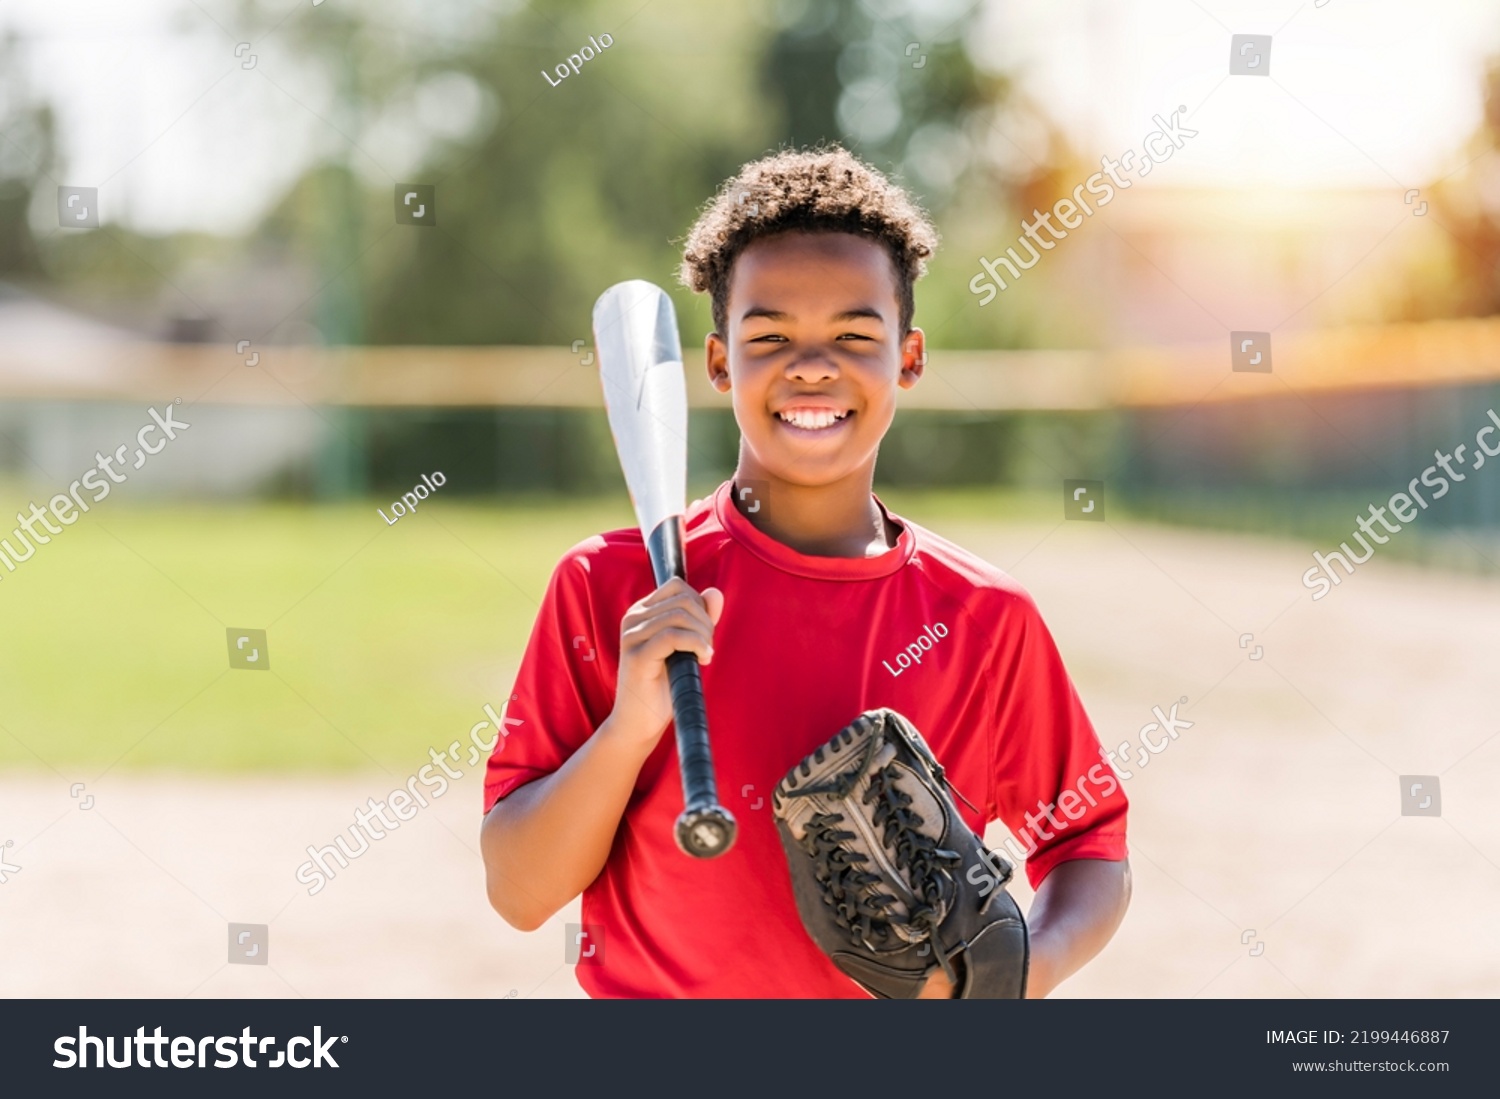 A portrait of child with glove and looking at camera playing baseball #2199446887